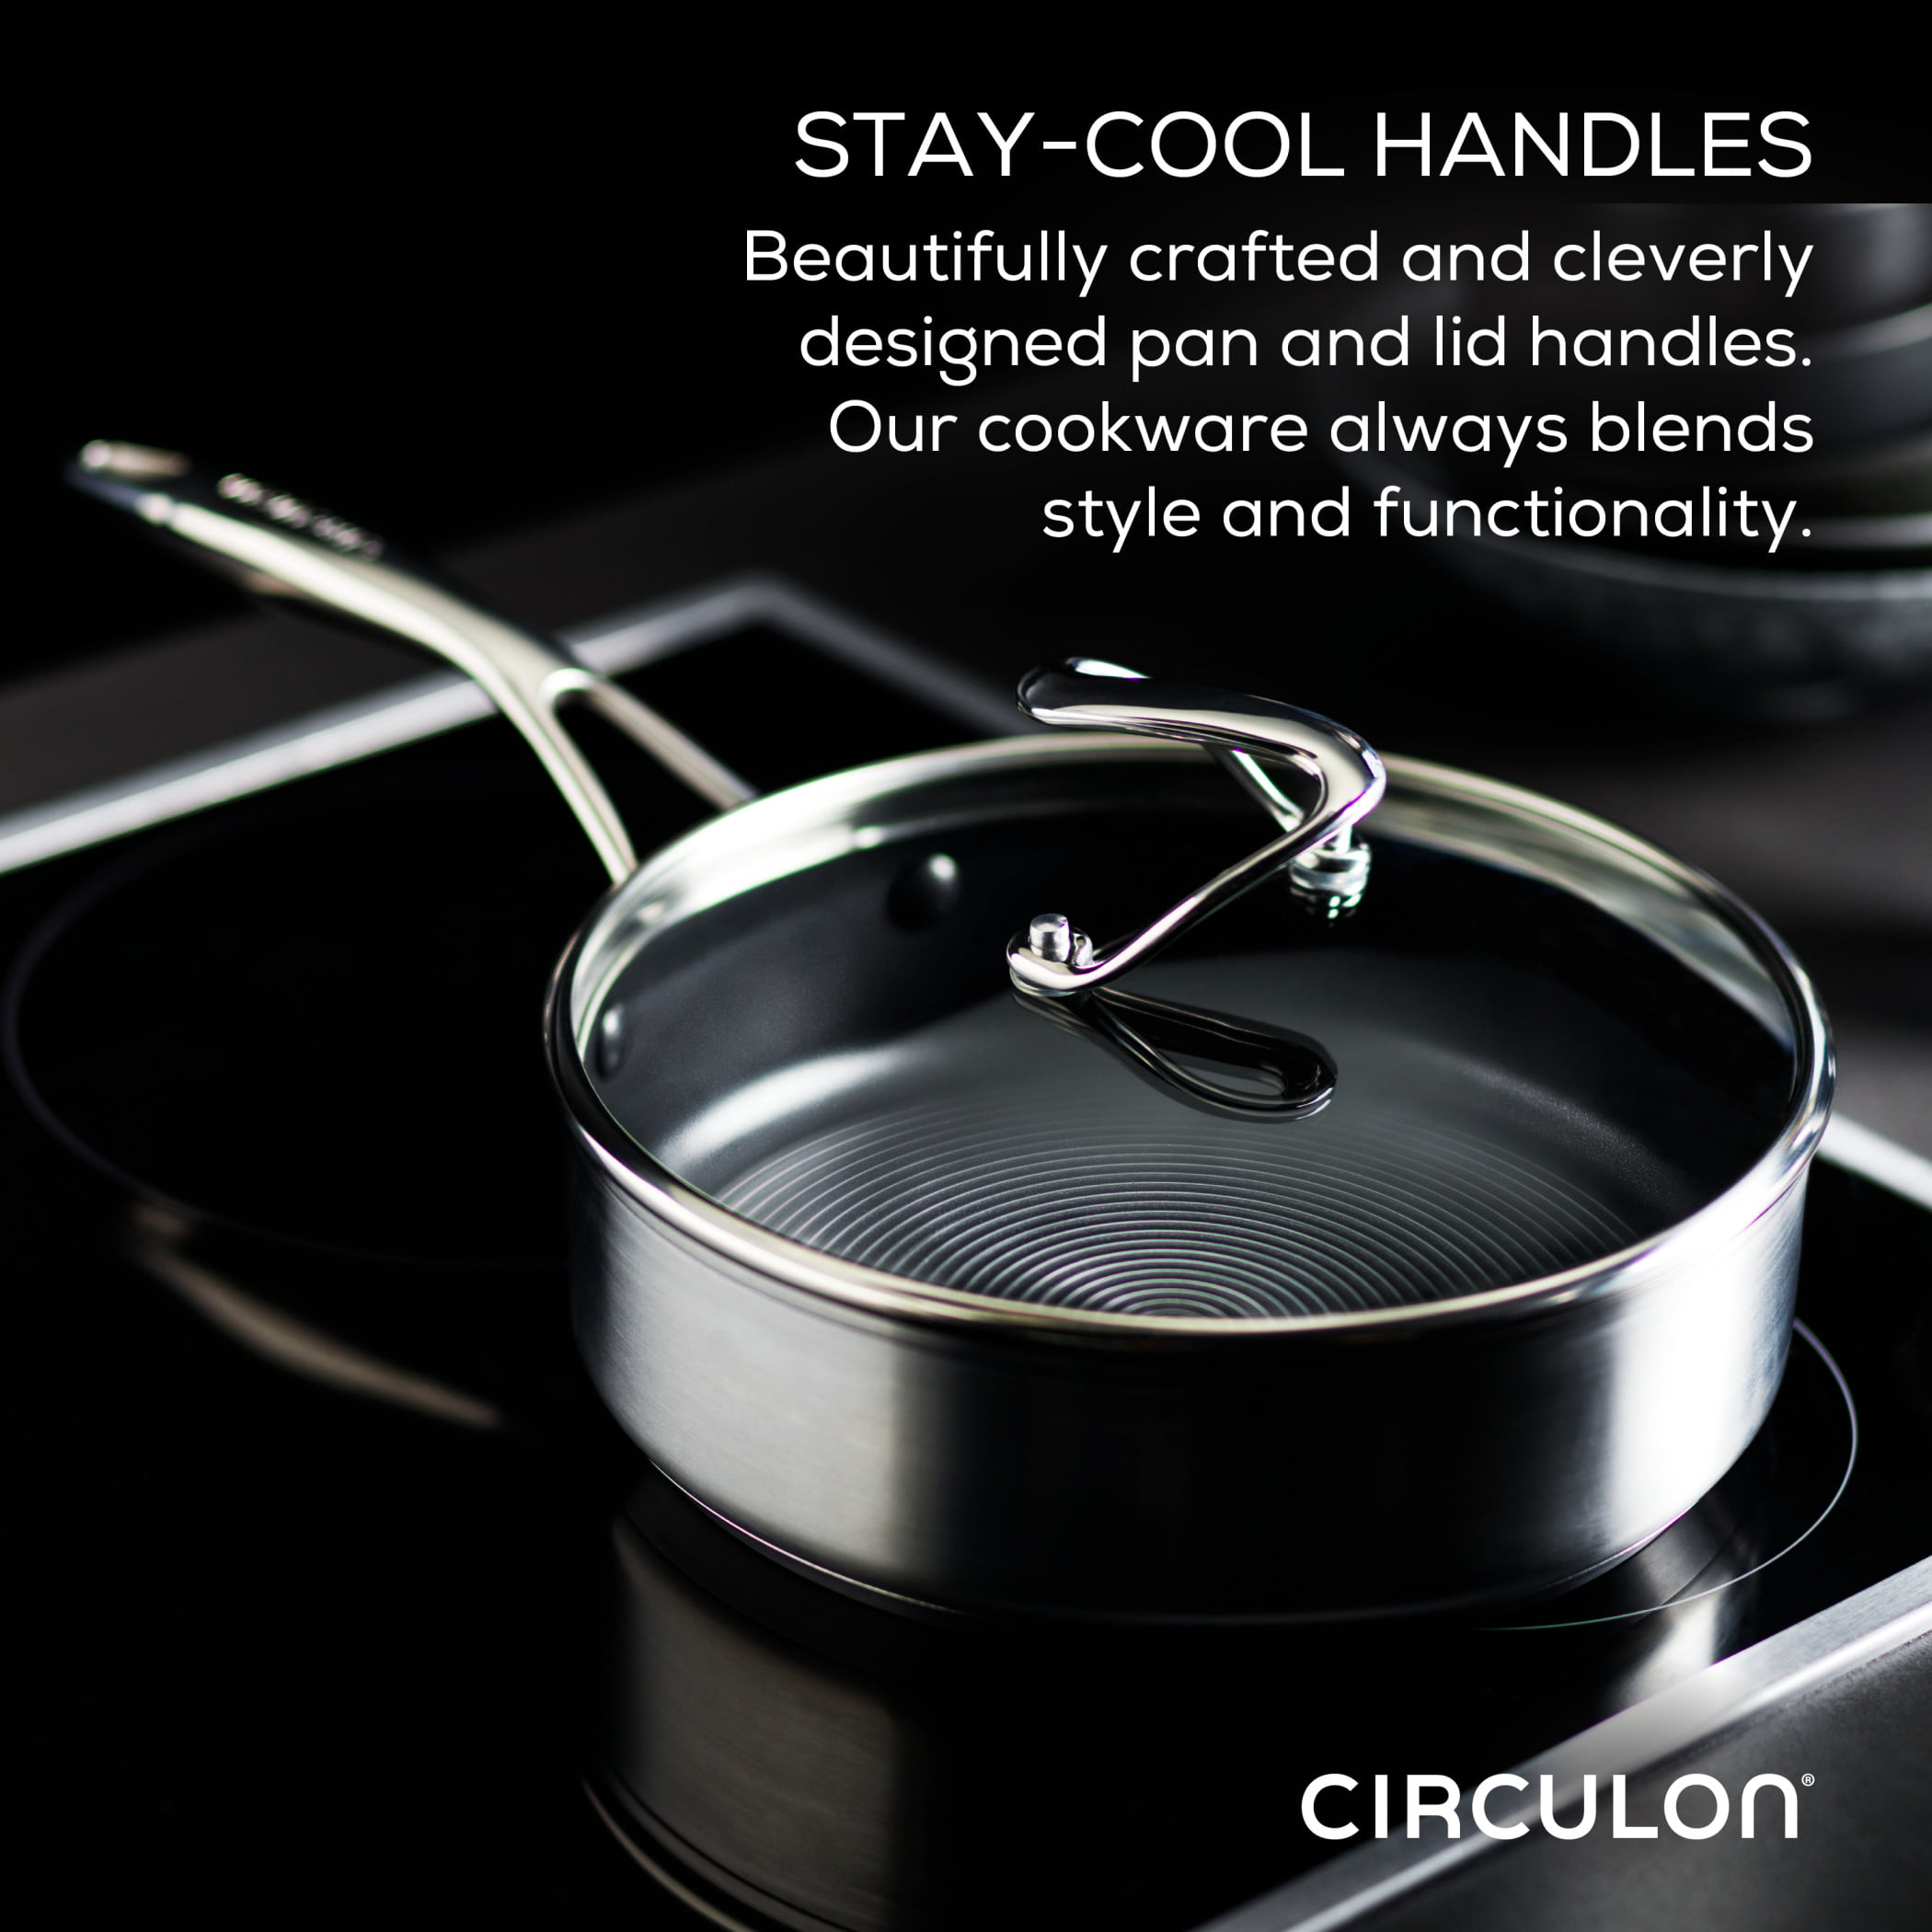 Circulon Momentum Stainless Steel Cookware Set, 11-Piece - Elevate Your Culinary Passion with Innovative Design